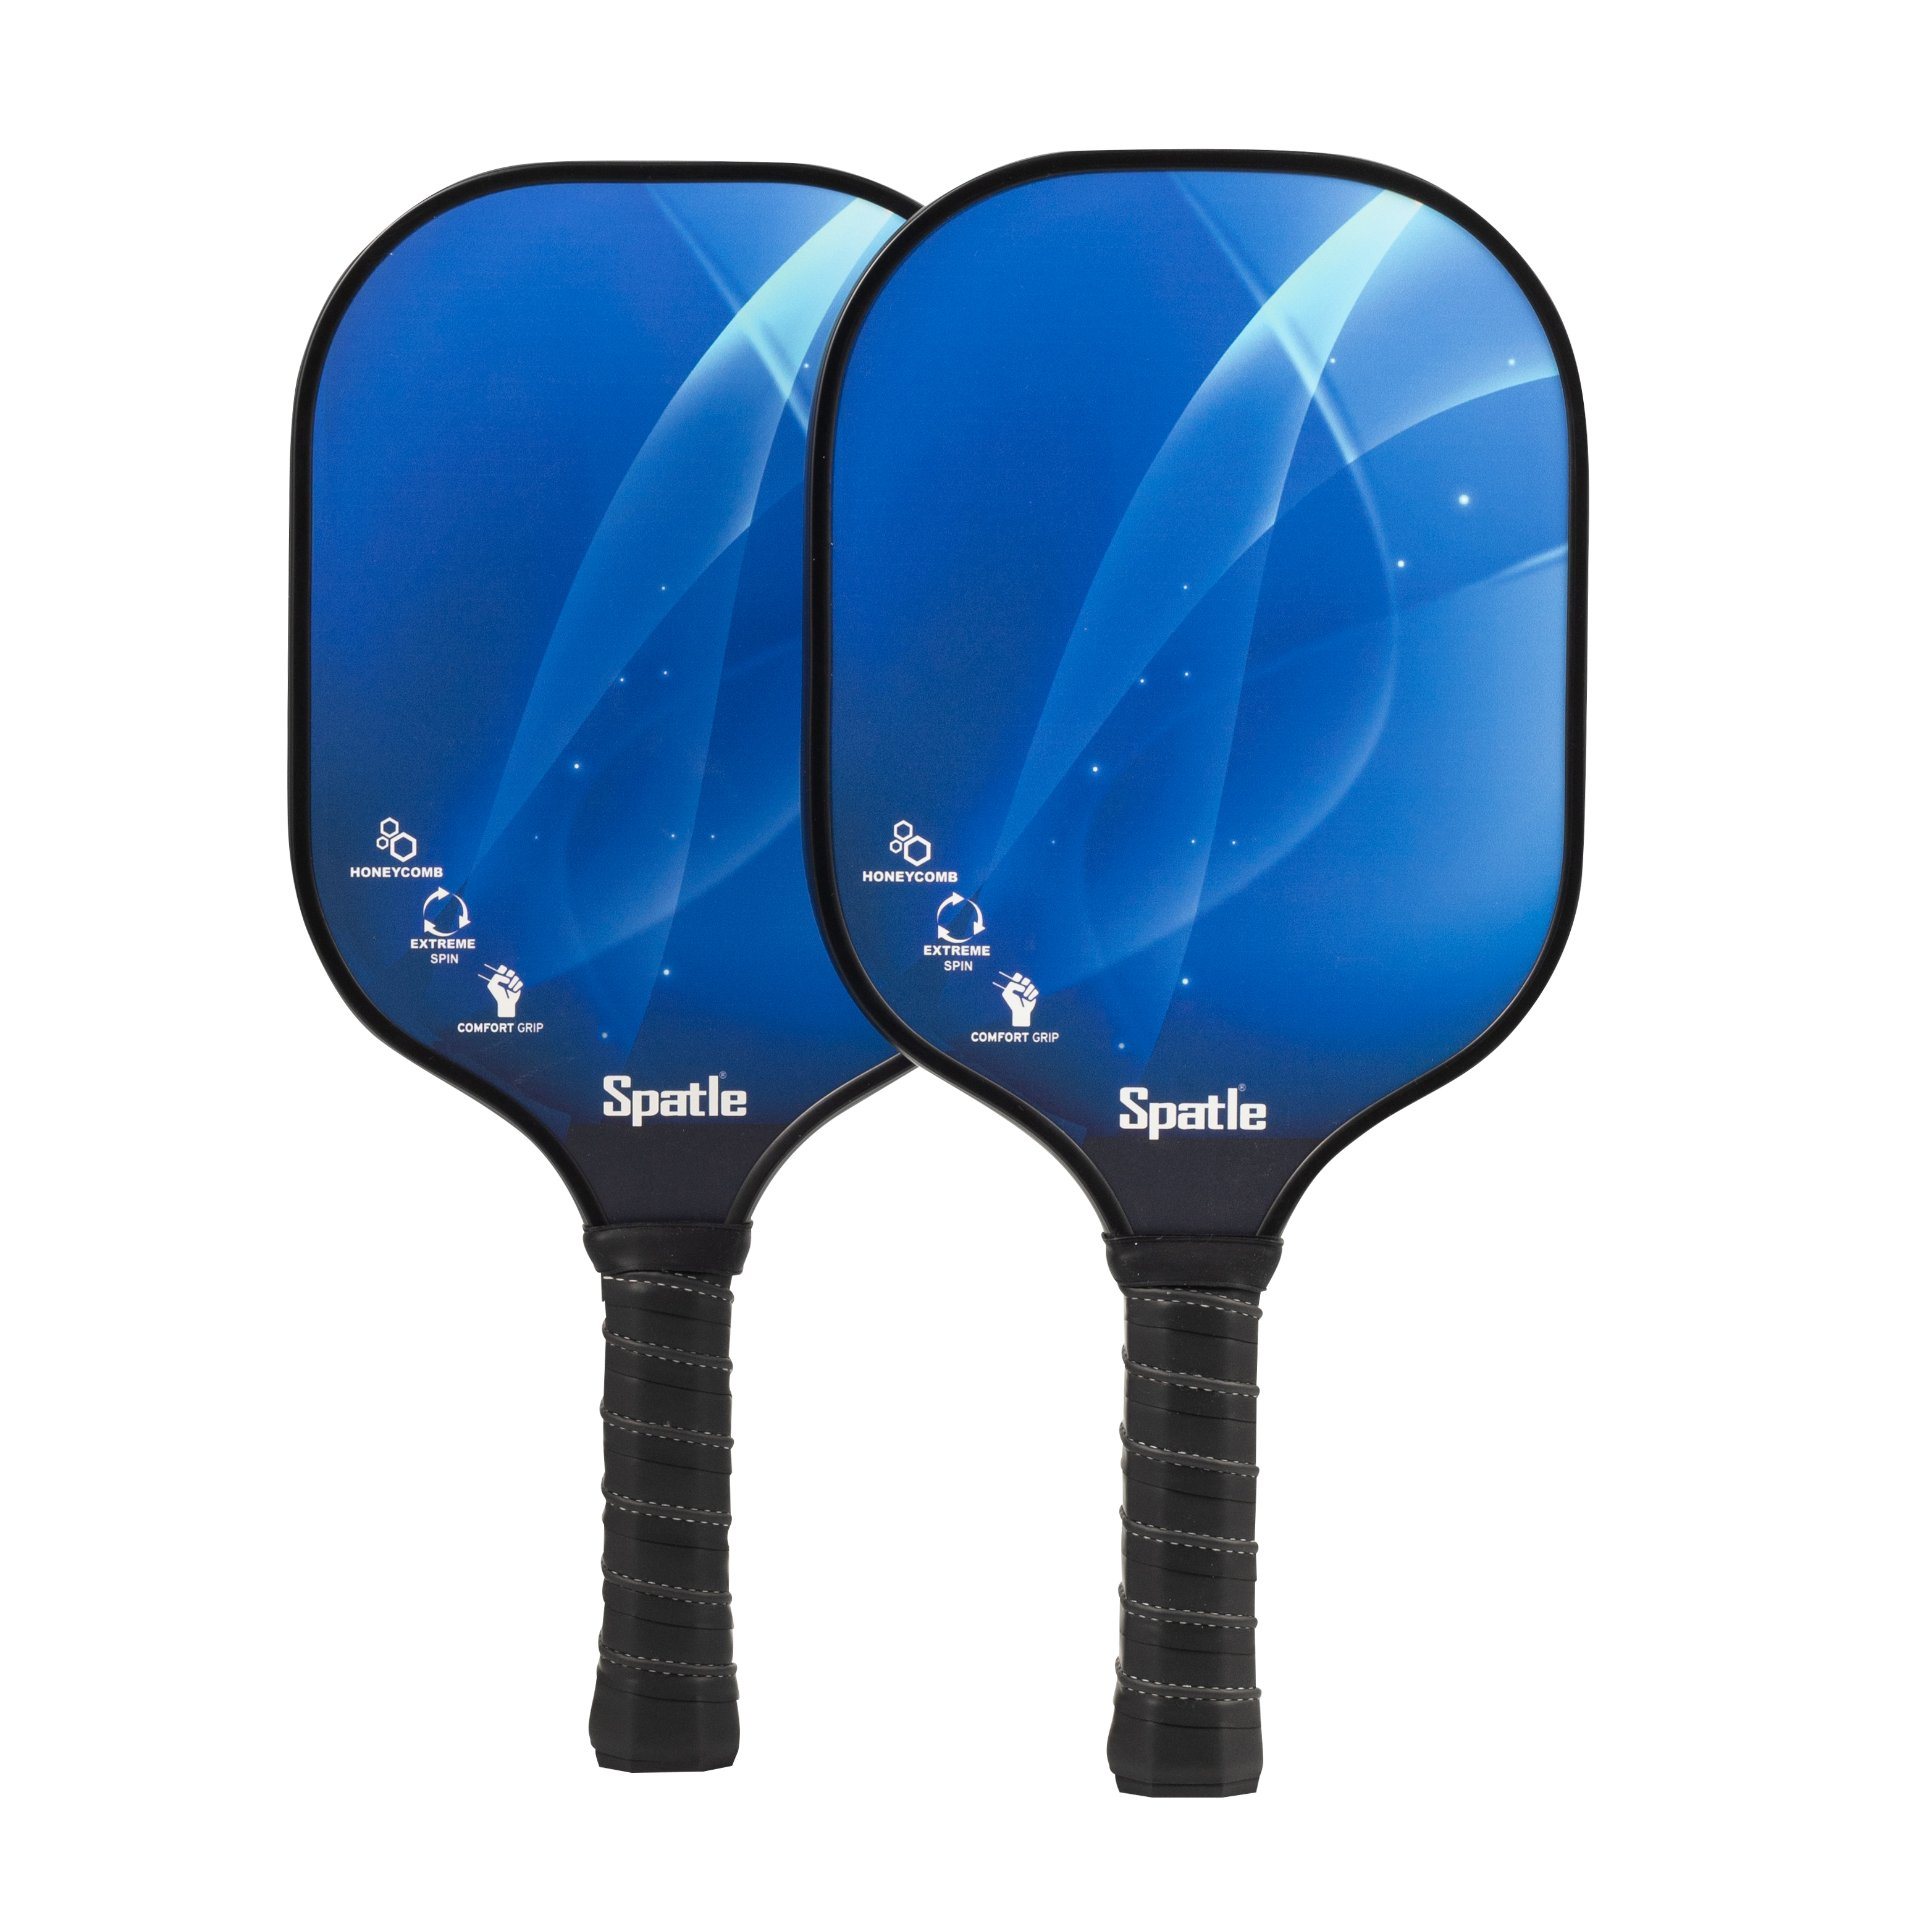 Carbon Fiber Face with Honeycomb Polypropylene Core Elongated Pickleball Paddle